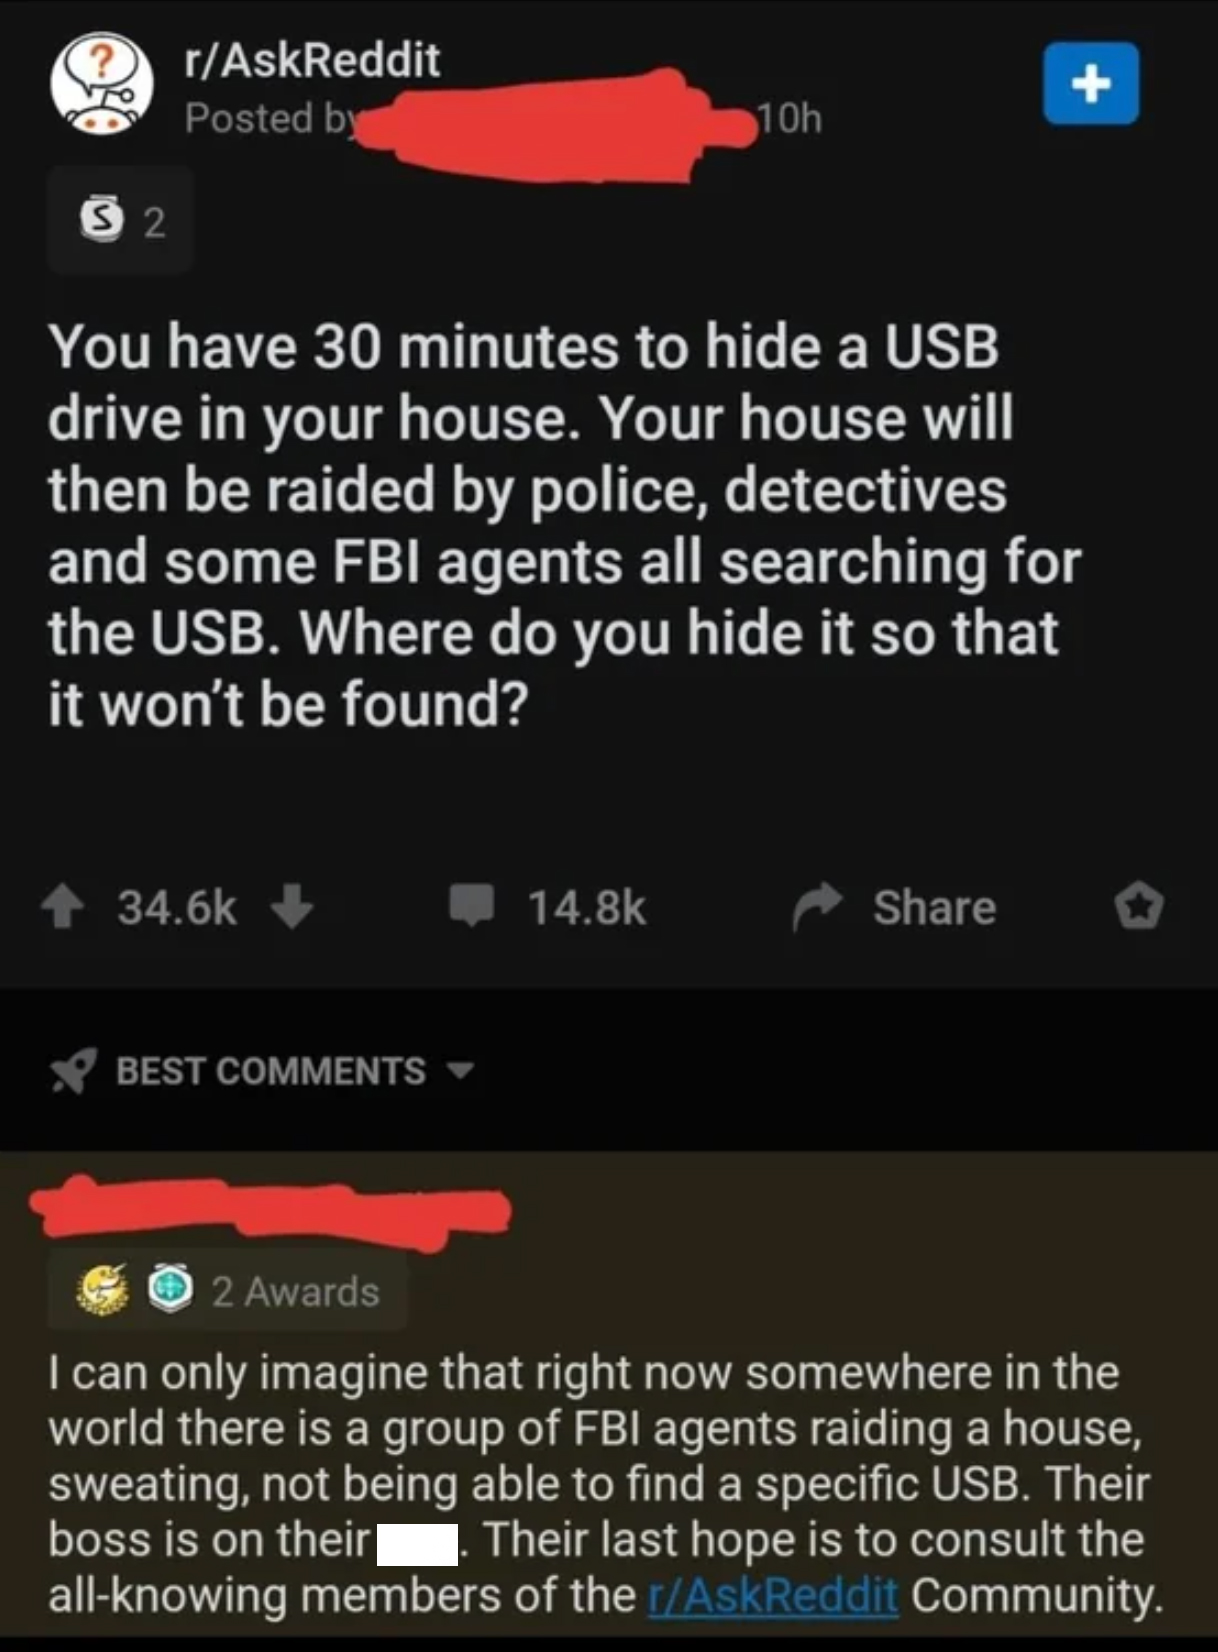 screenshot - rAskReddit Posted by 10h 52 You have 30 minutes to hide a Usb drive in your house. Your house will then be raided by police, detectives and some Fbi agents all searching for the Usb. Where do you hide it so that it won't be found? Best 2 Awar